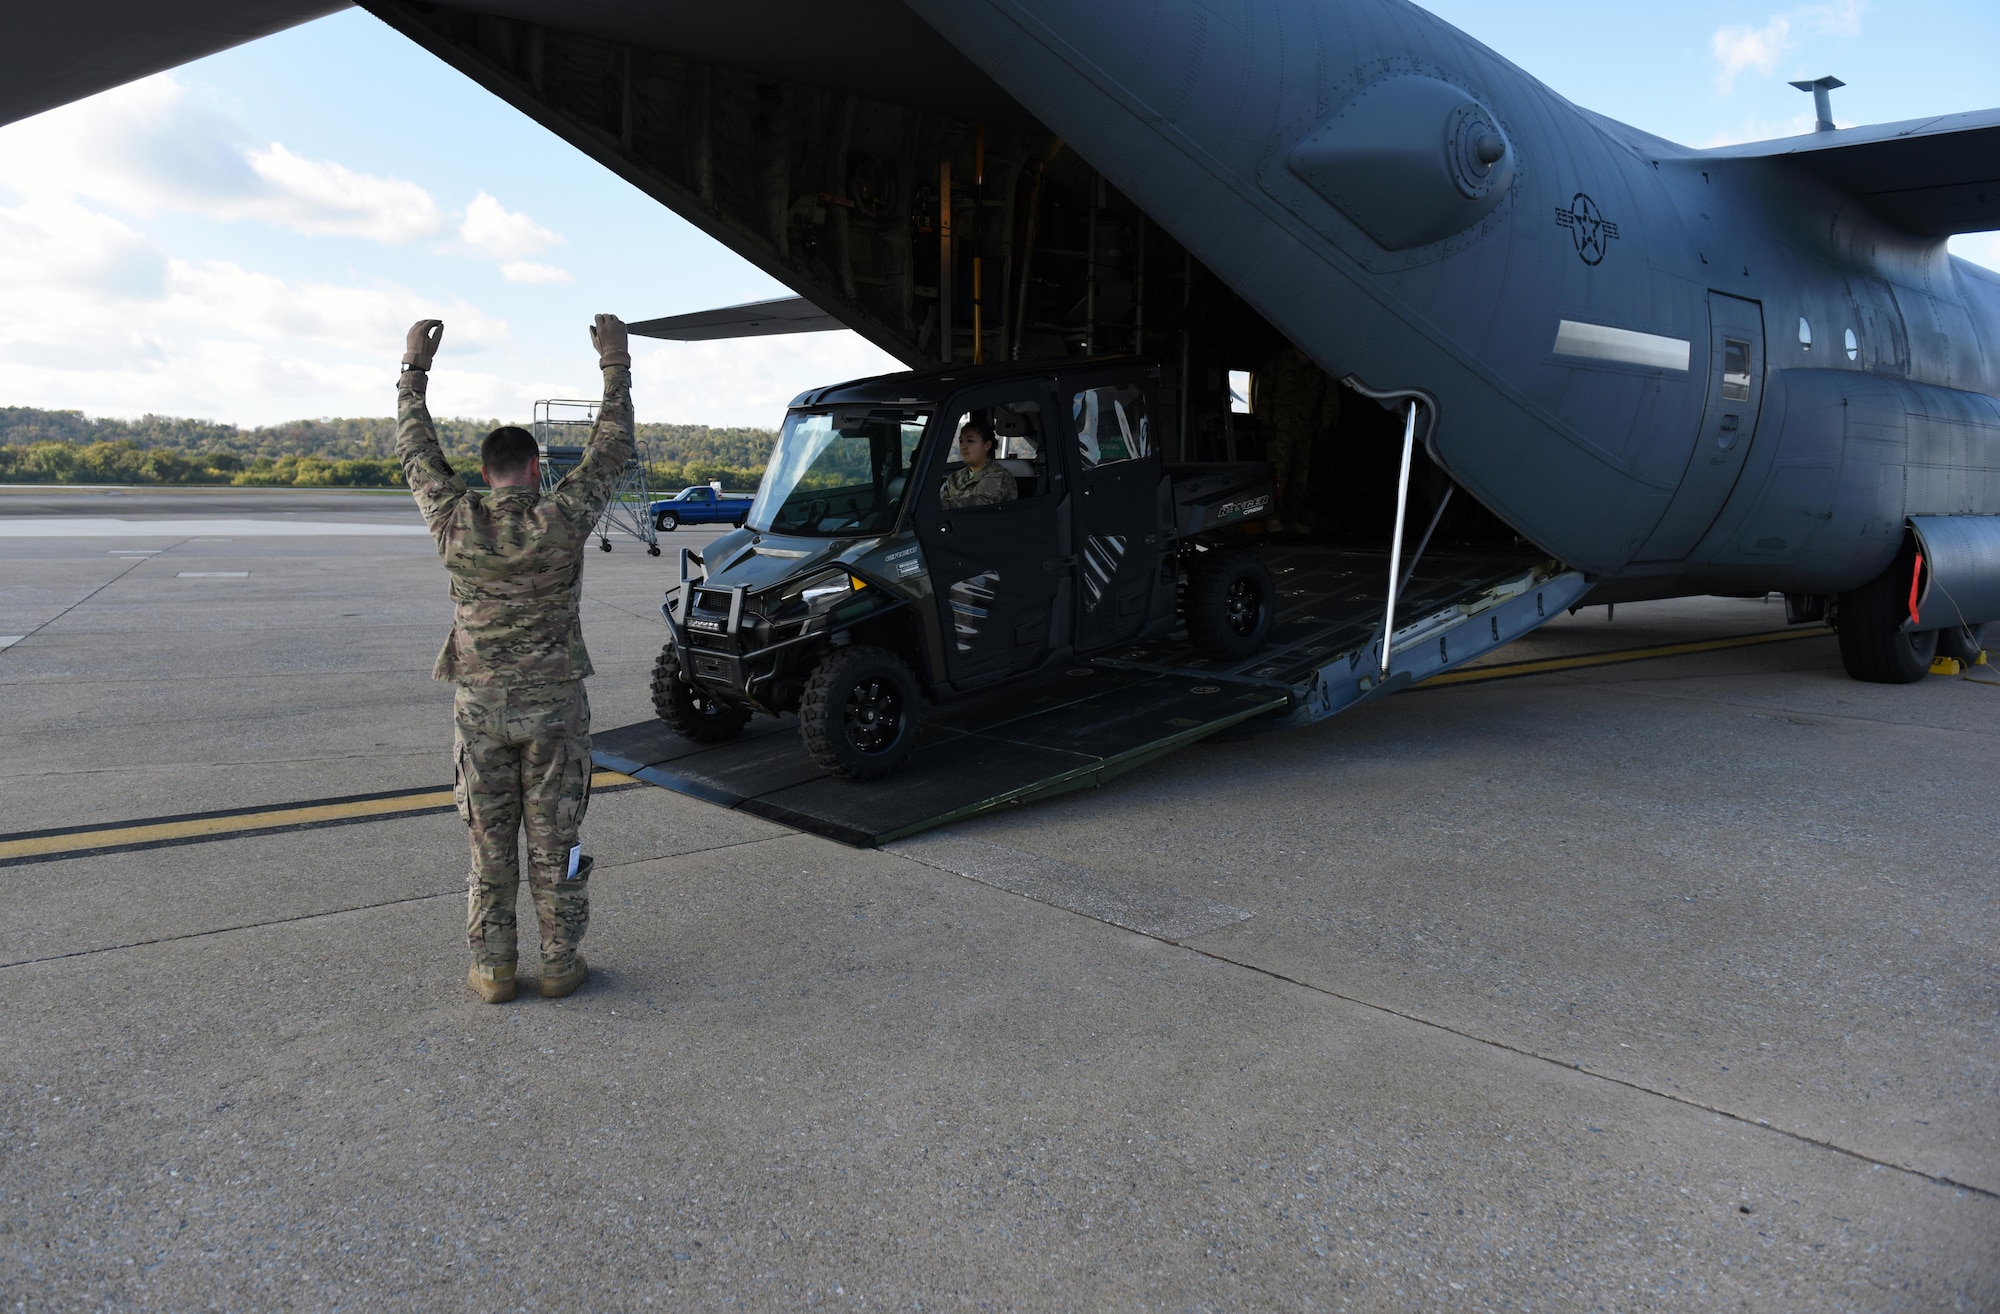 Loadmasters from the 193rd Special Operations Squadron conduct canary slide training